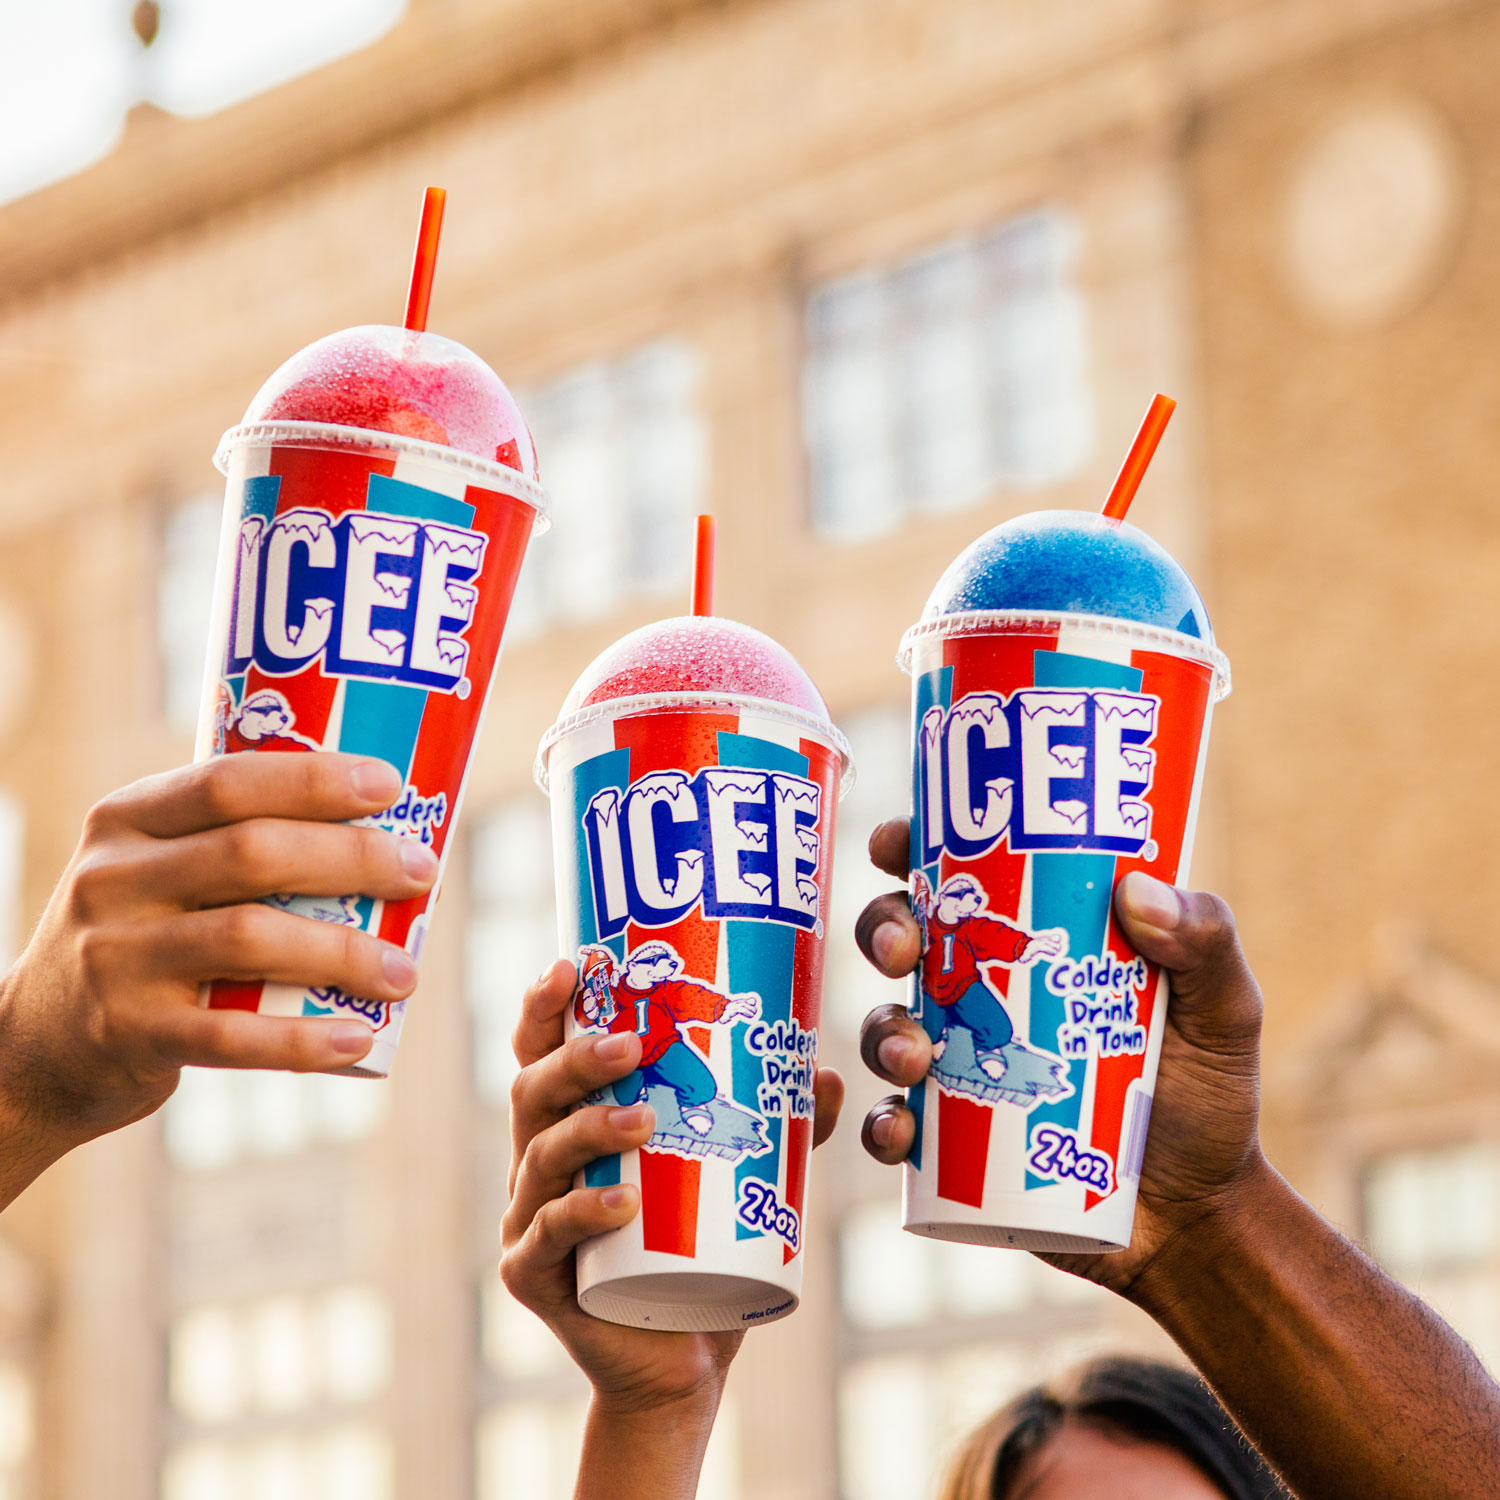 Our Brands & Services – ICEE